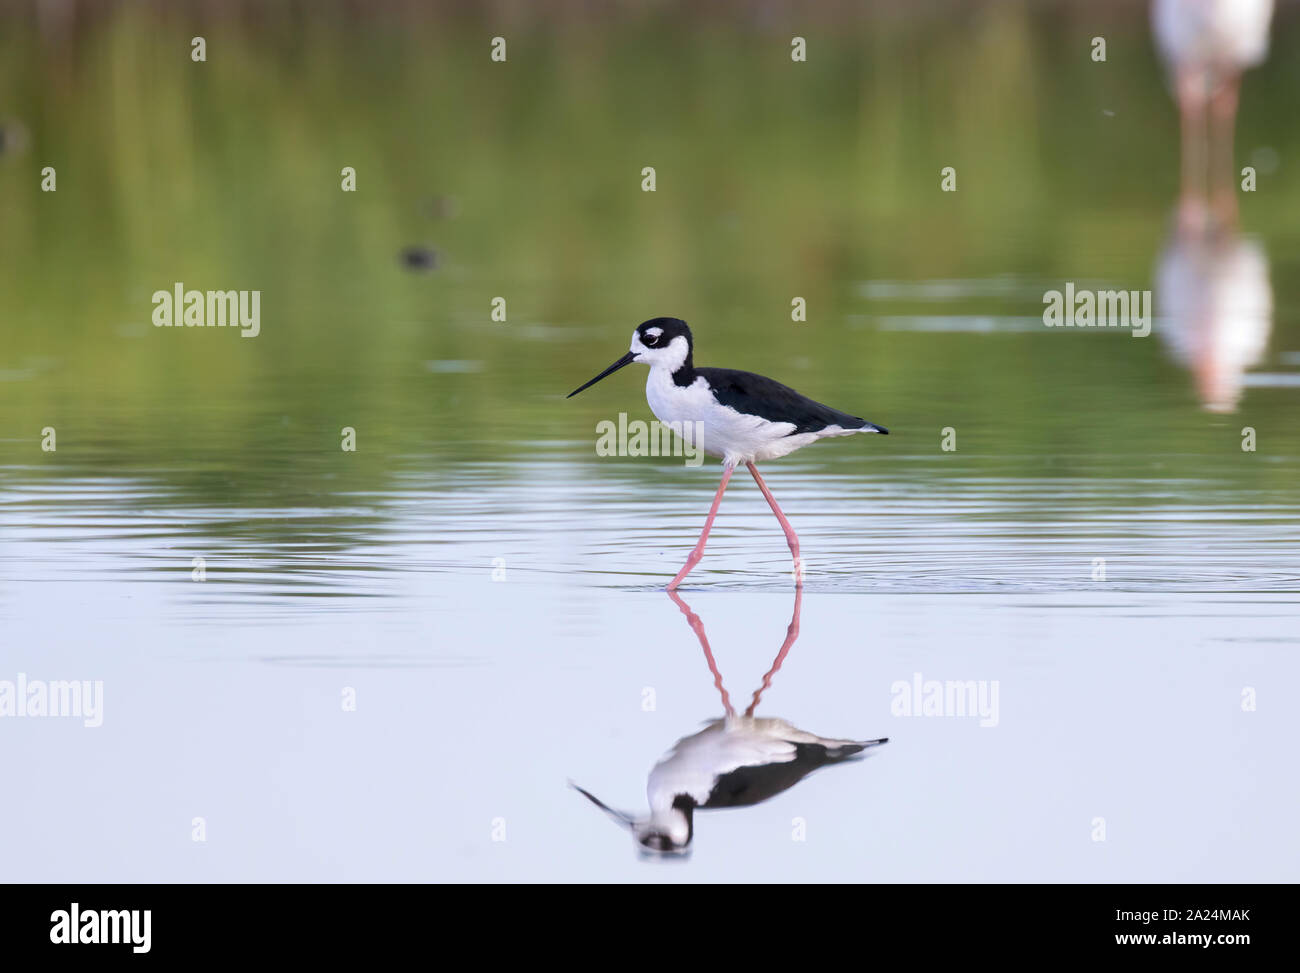 Black-necked stilt (Himantopus mexicanus) waging in the shell water, Galveston, Texas, USA. Stock Photo